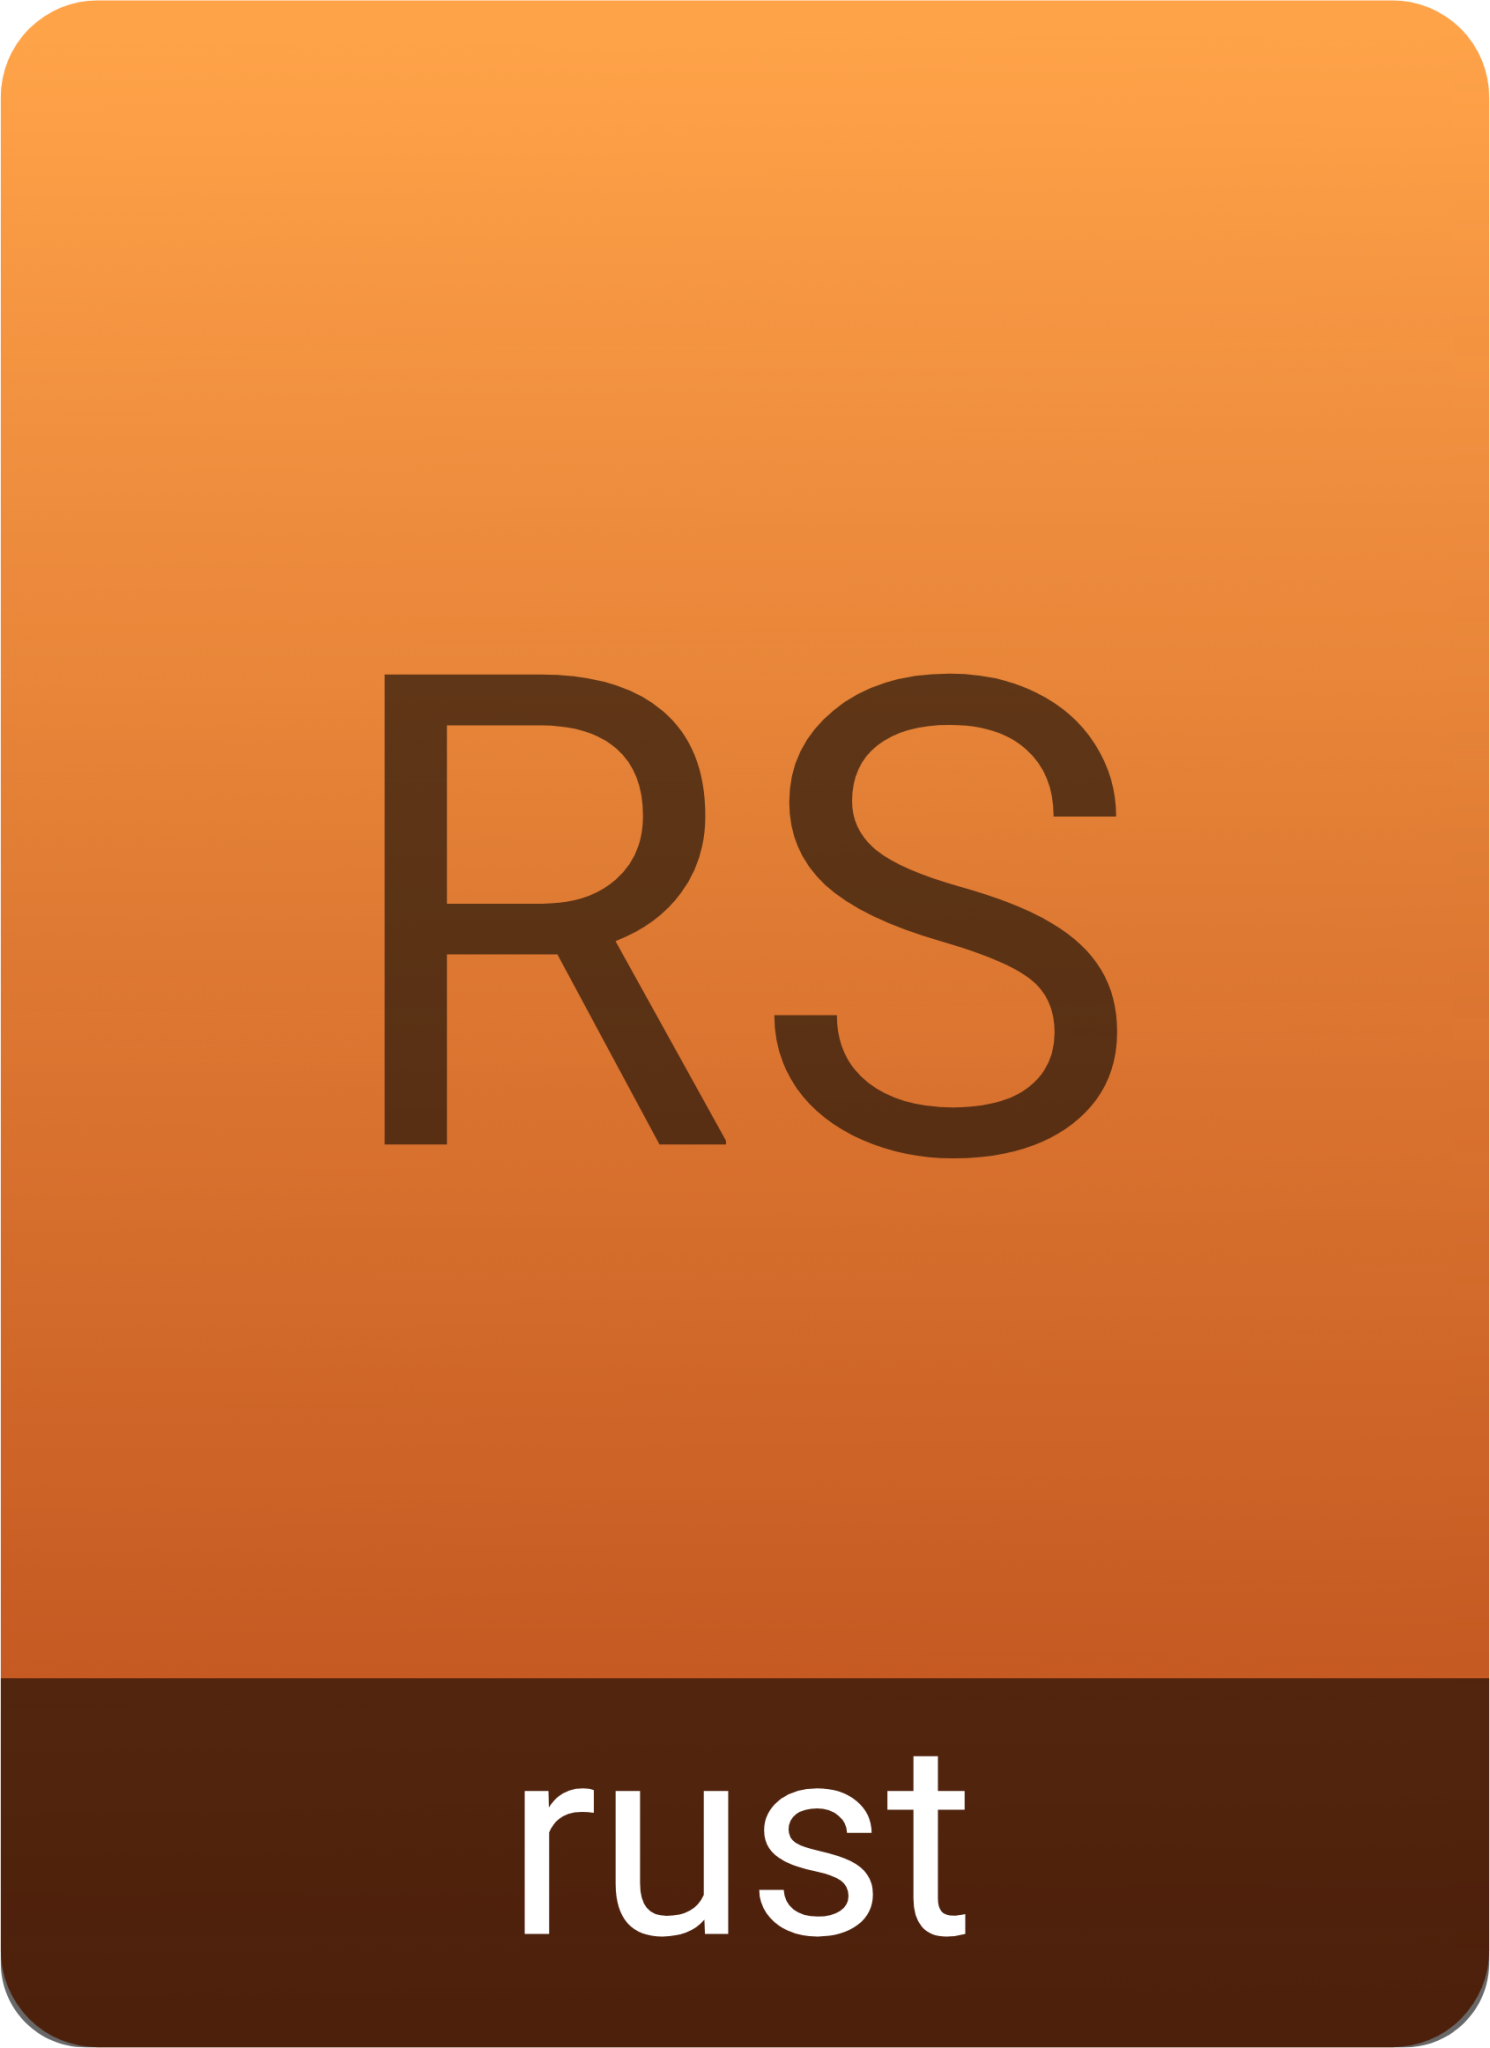 text rust icon